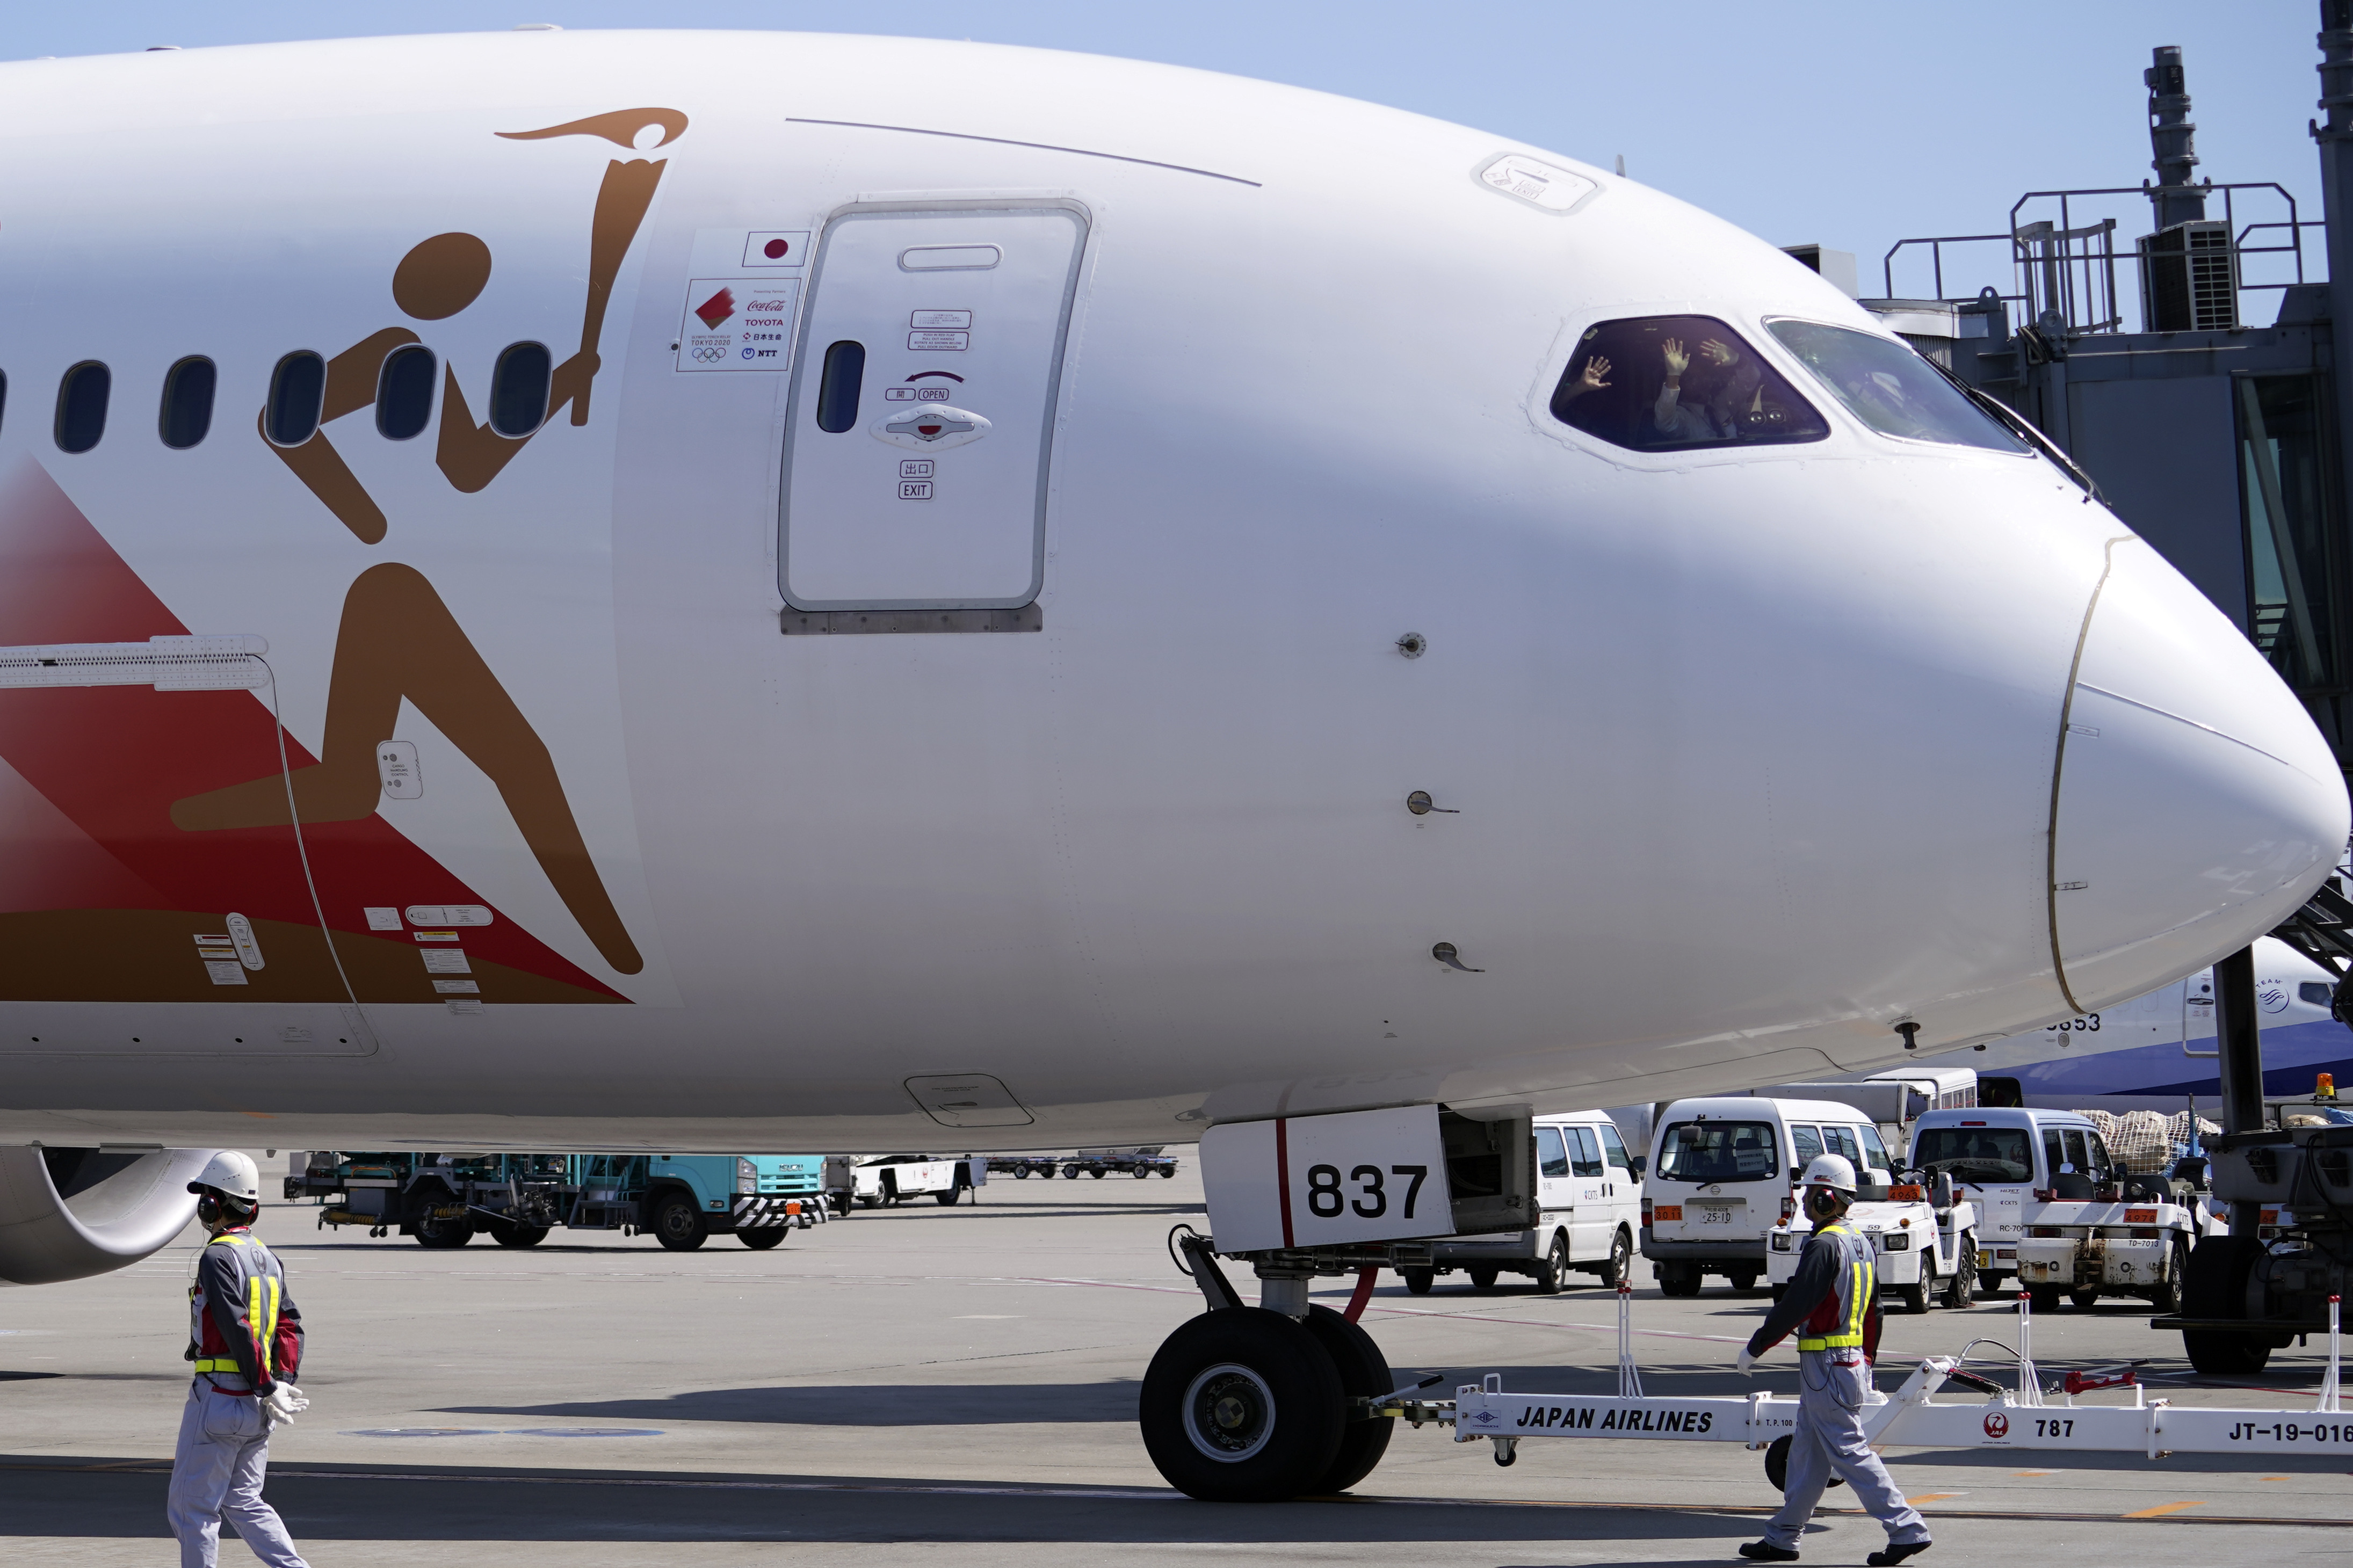 Pilots of the special "Tokyo 2020 Go" aircraft that will transport the Olympic Flame to Japan after the Torch Handover Ceremony in Greece, wave as they leave Haneda International Airport in Tokyo Wednesday, March 18, 2020. (AP Photo/Eugene Hoshiko)